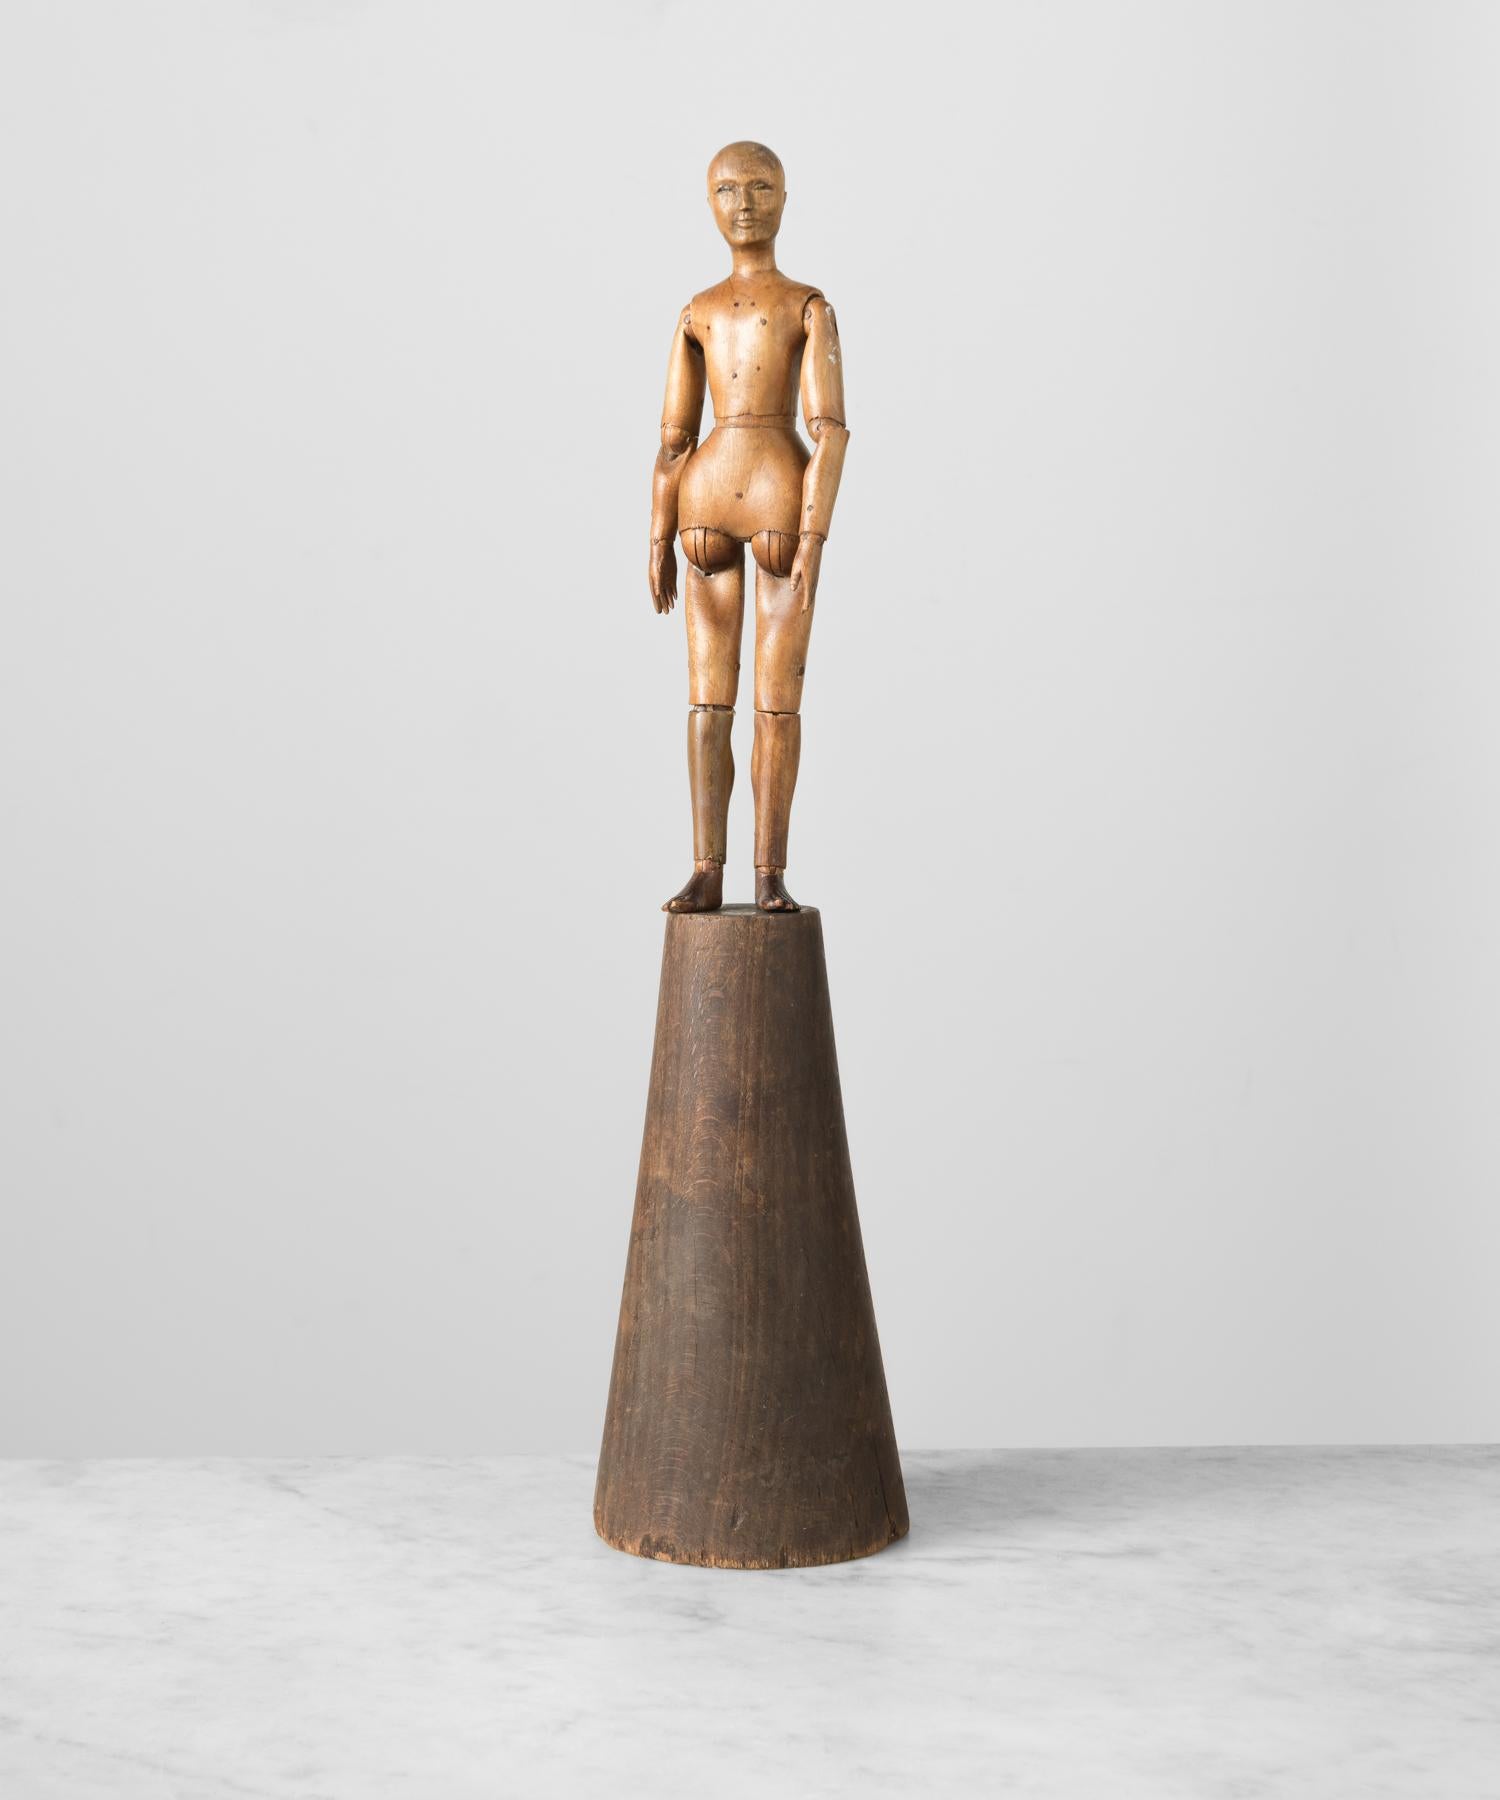 Artist model, France, circa 1875.

Finely carved from pine, standing 9